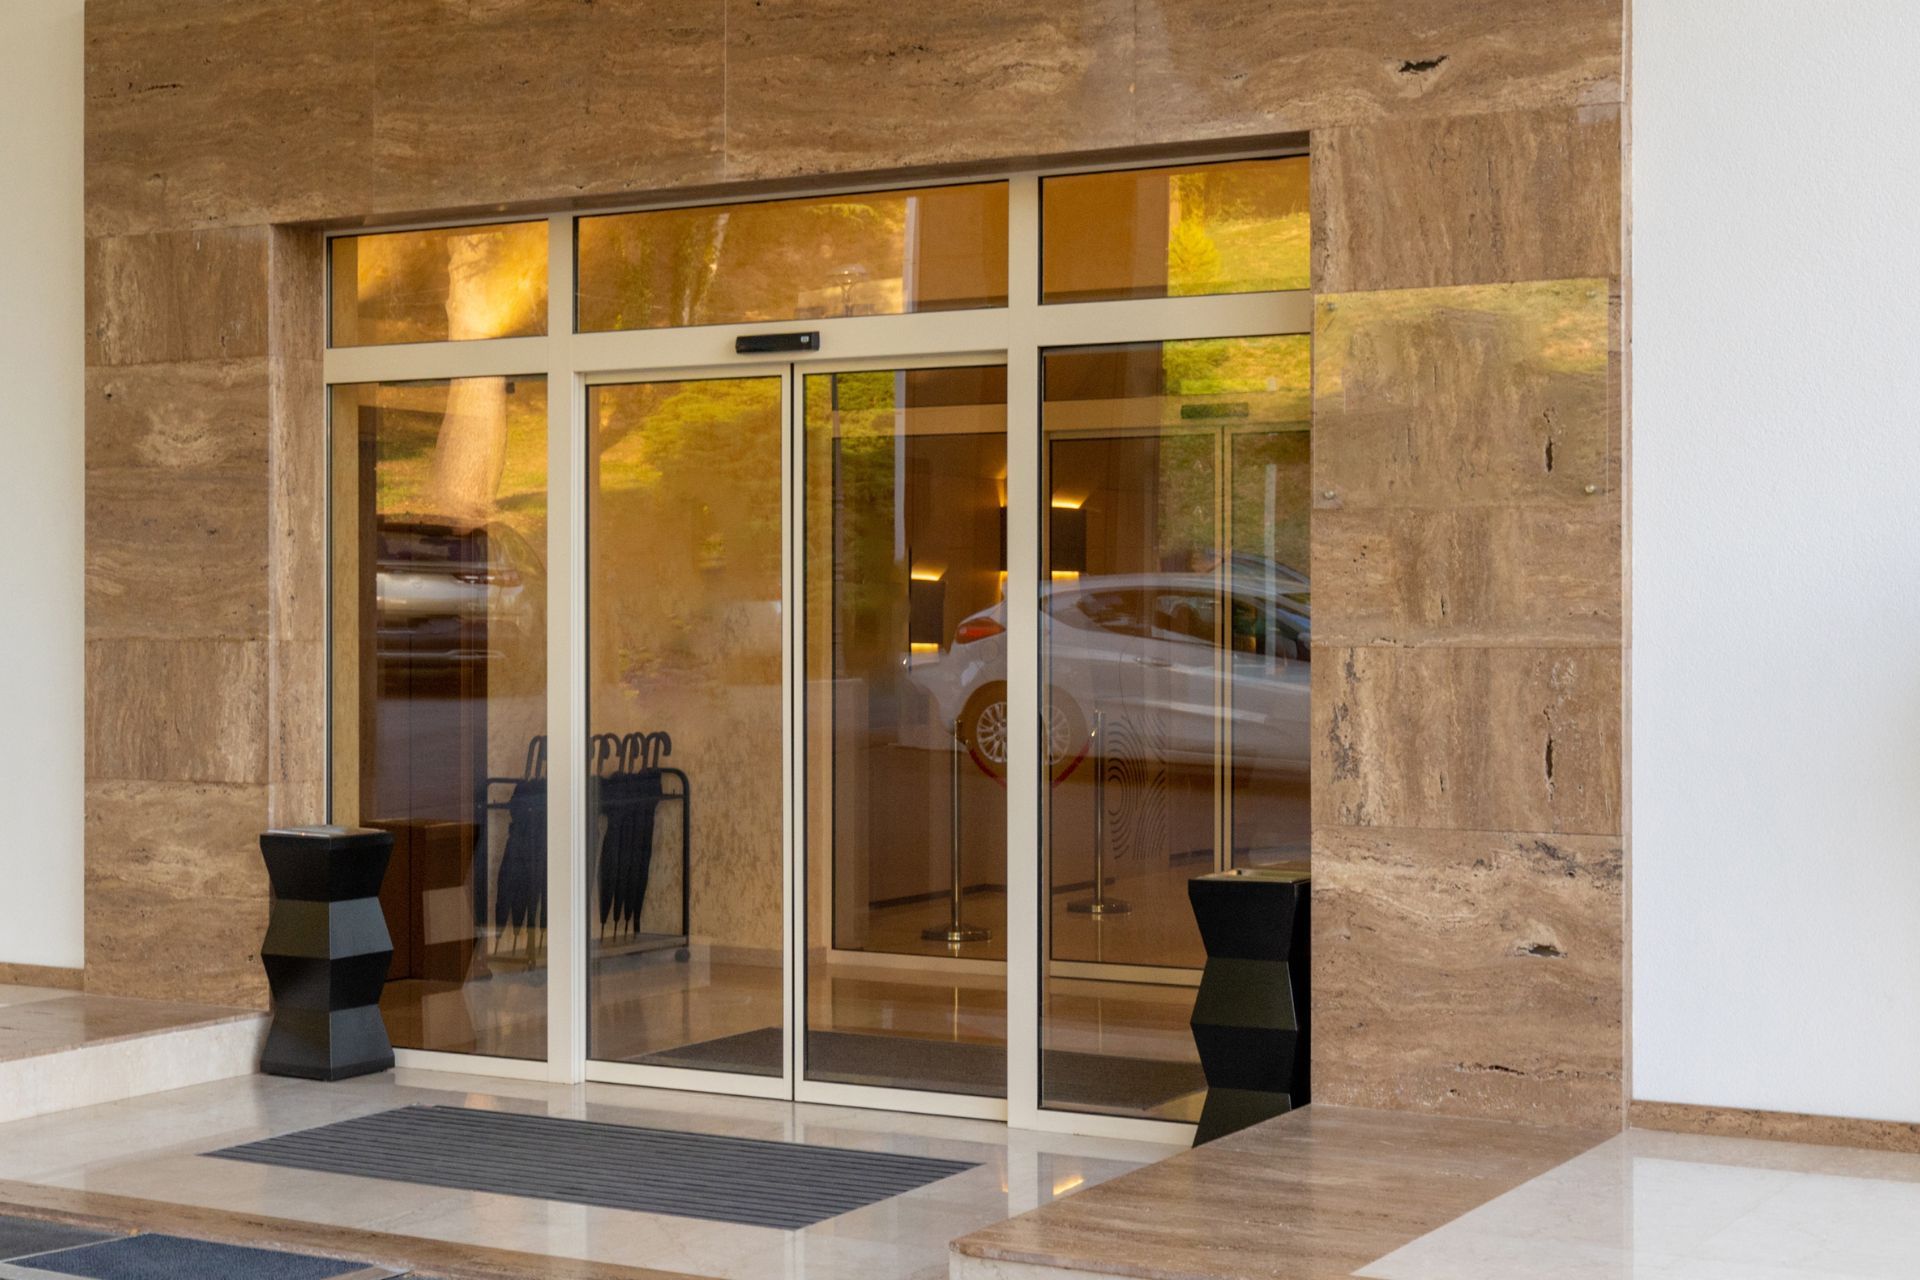 Swing Doors vs. Sliding Doors: What’s the Difference?